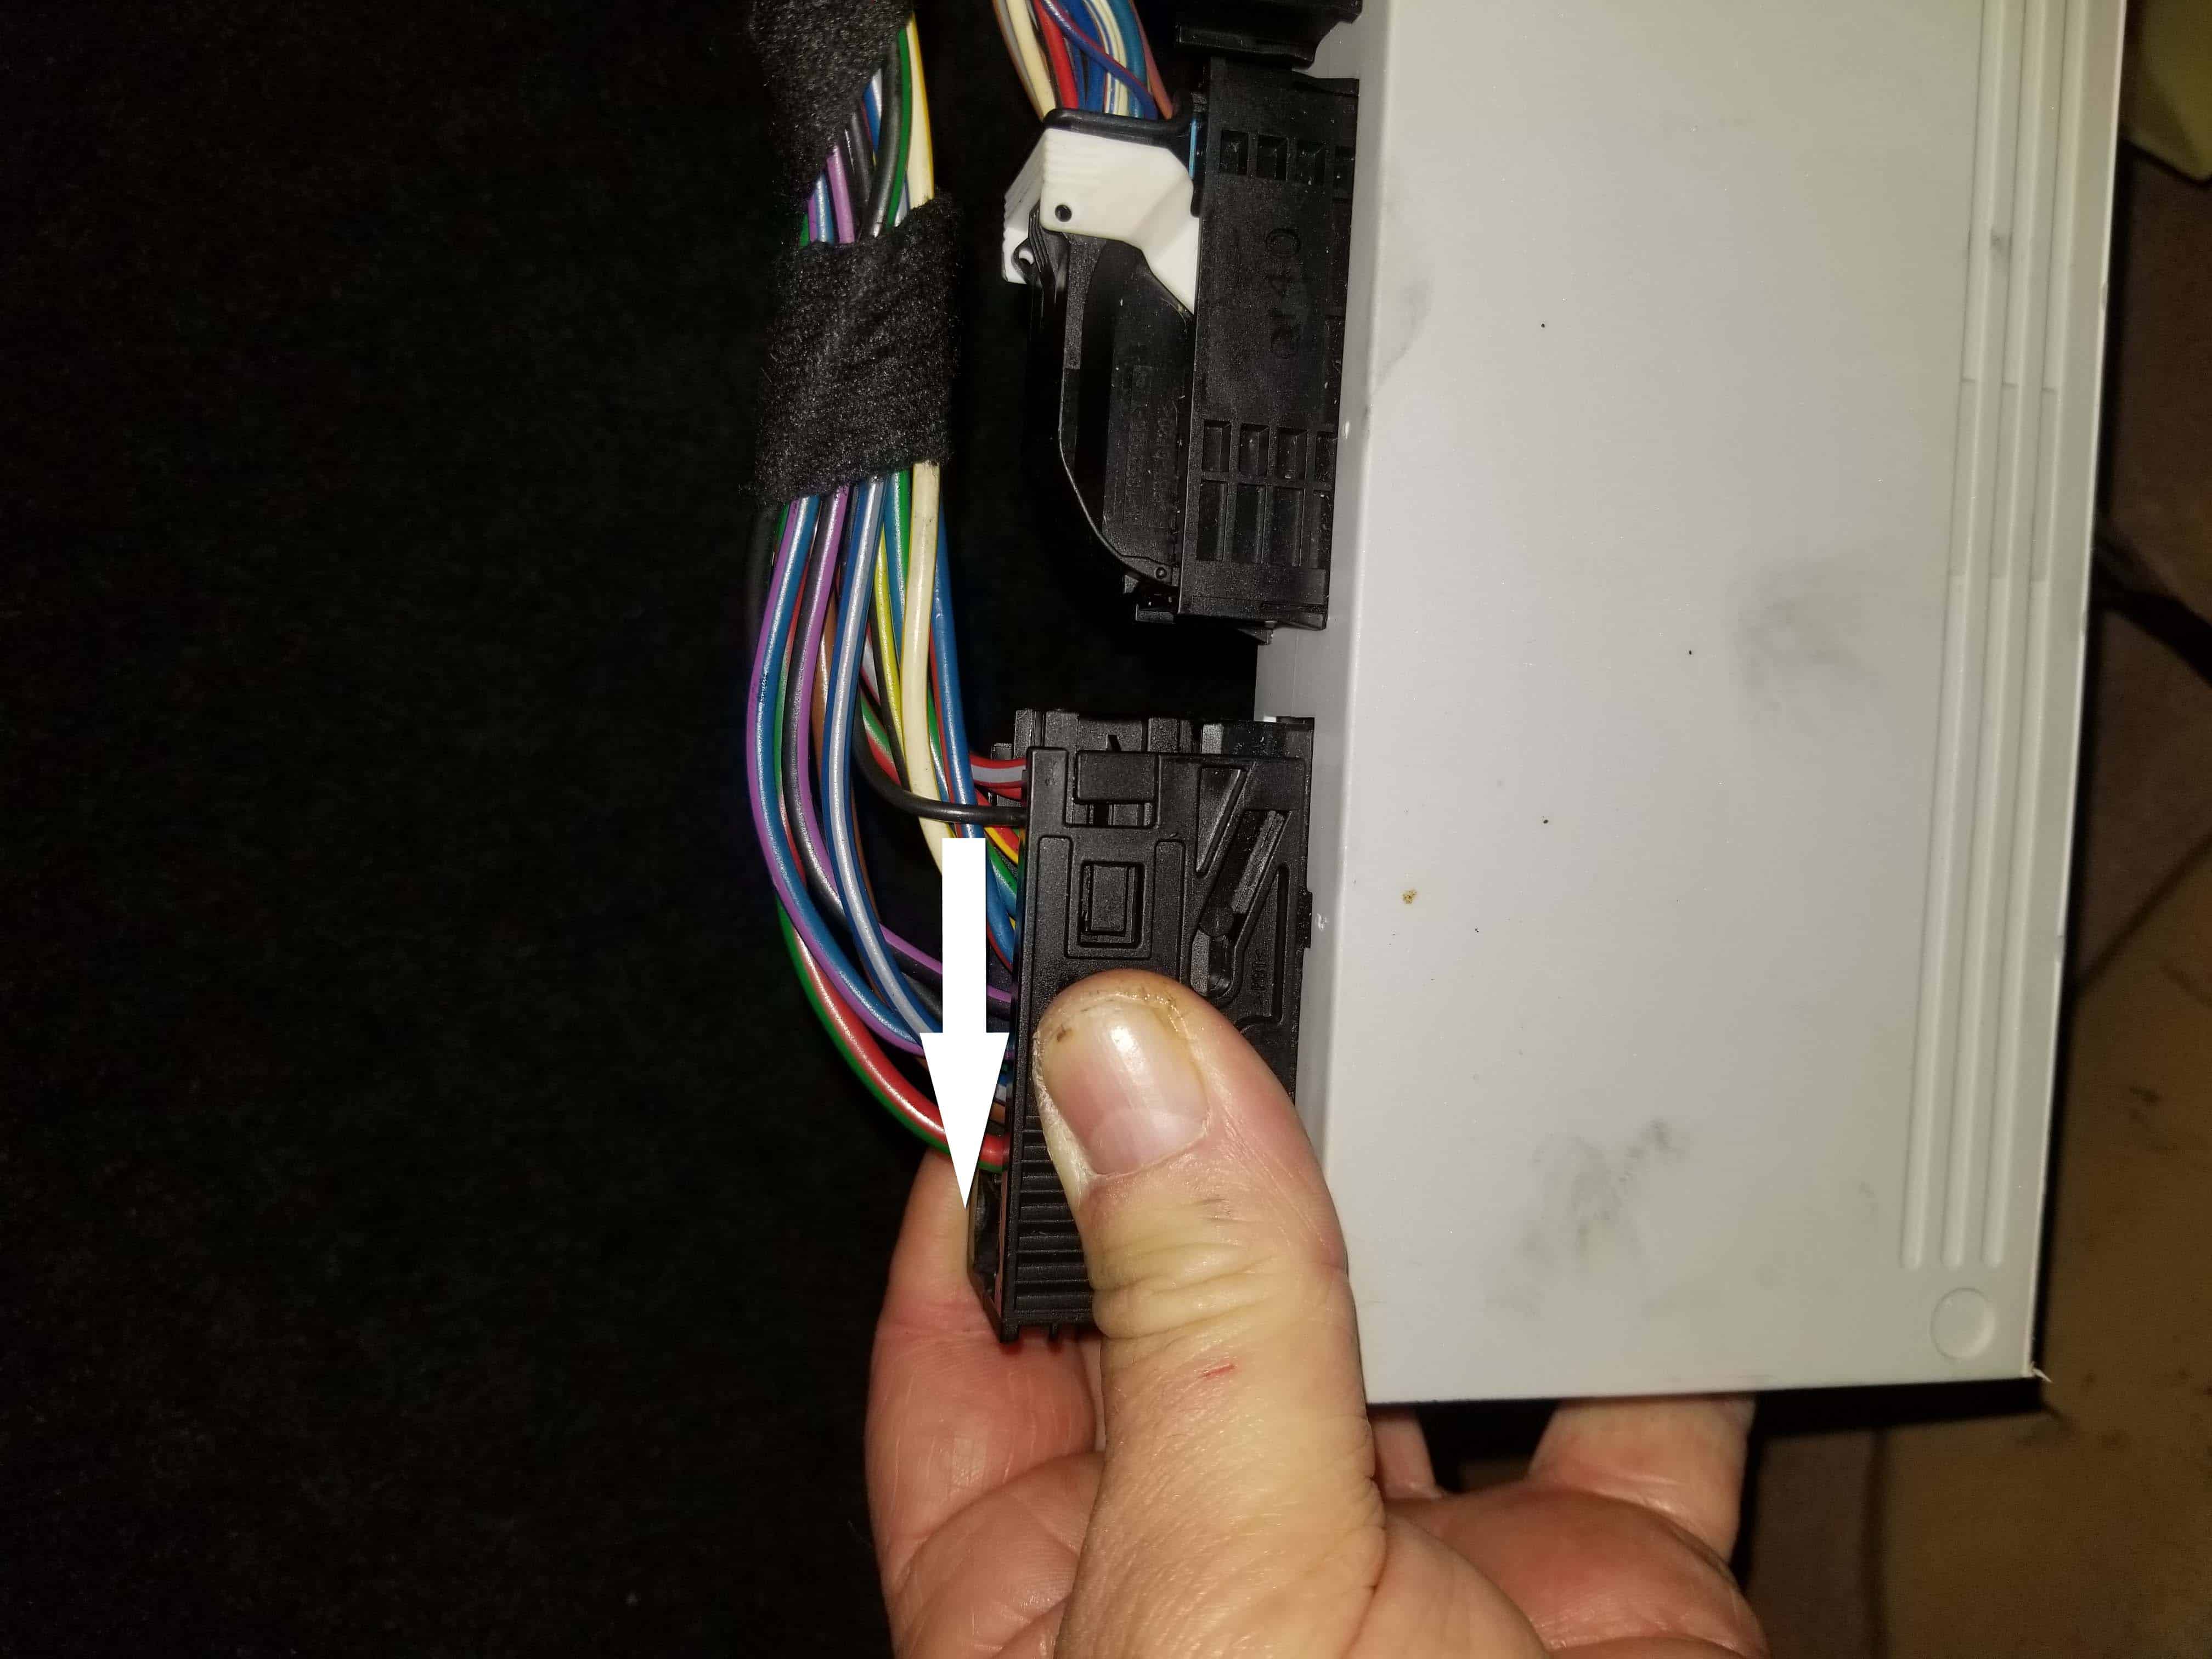 bmw e46 GM5 module - Squeeze the first wiring harness connection and slide it sideways to release it.